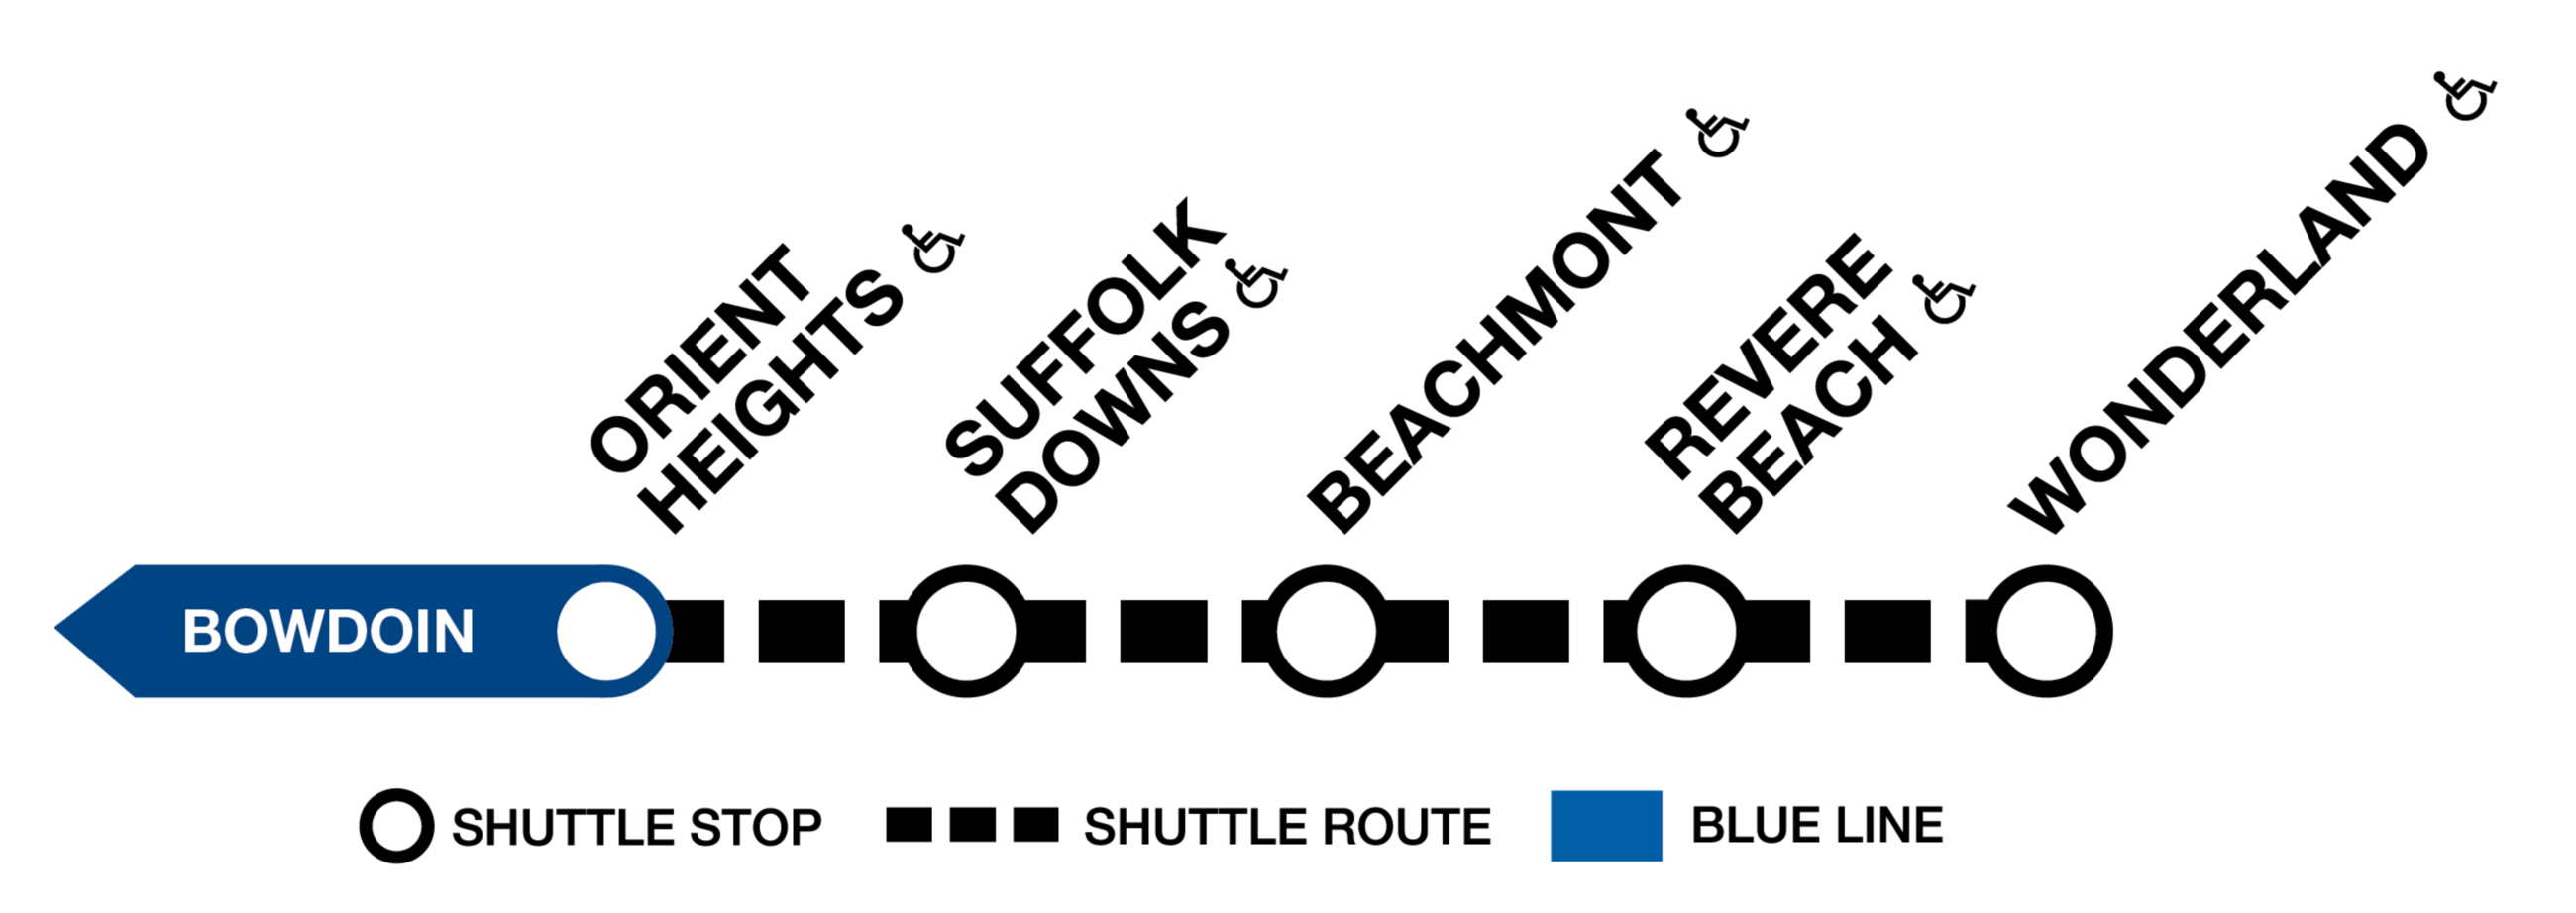 A line map of a section of the Blue Line shows that four stations — Suffolk Downs, Beachmont, Revere Beach, and Wonderland — will be closed to riders during the pedestrian bridge work at Suffolk Downs, and shuttles will run between Orient Heights to Wonderland.